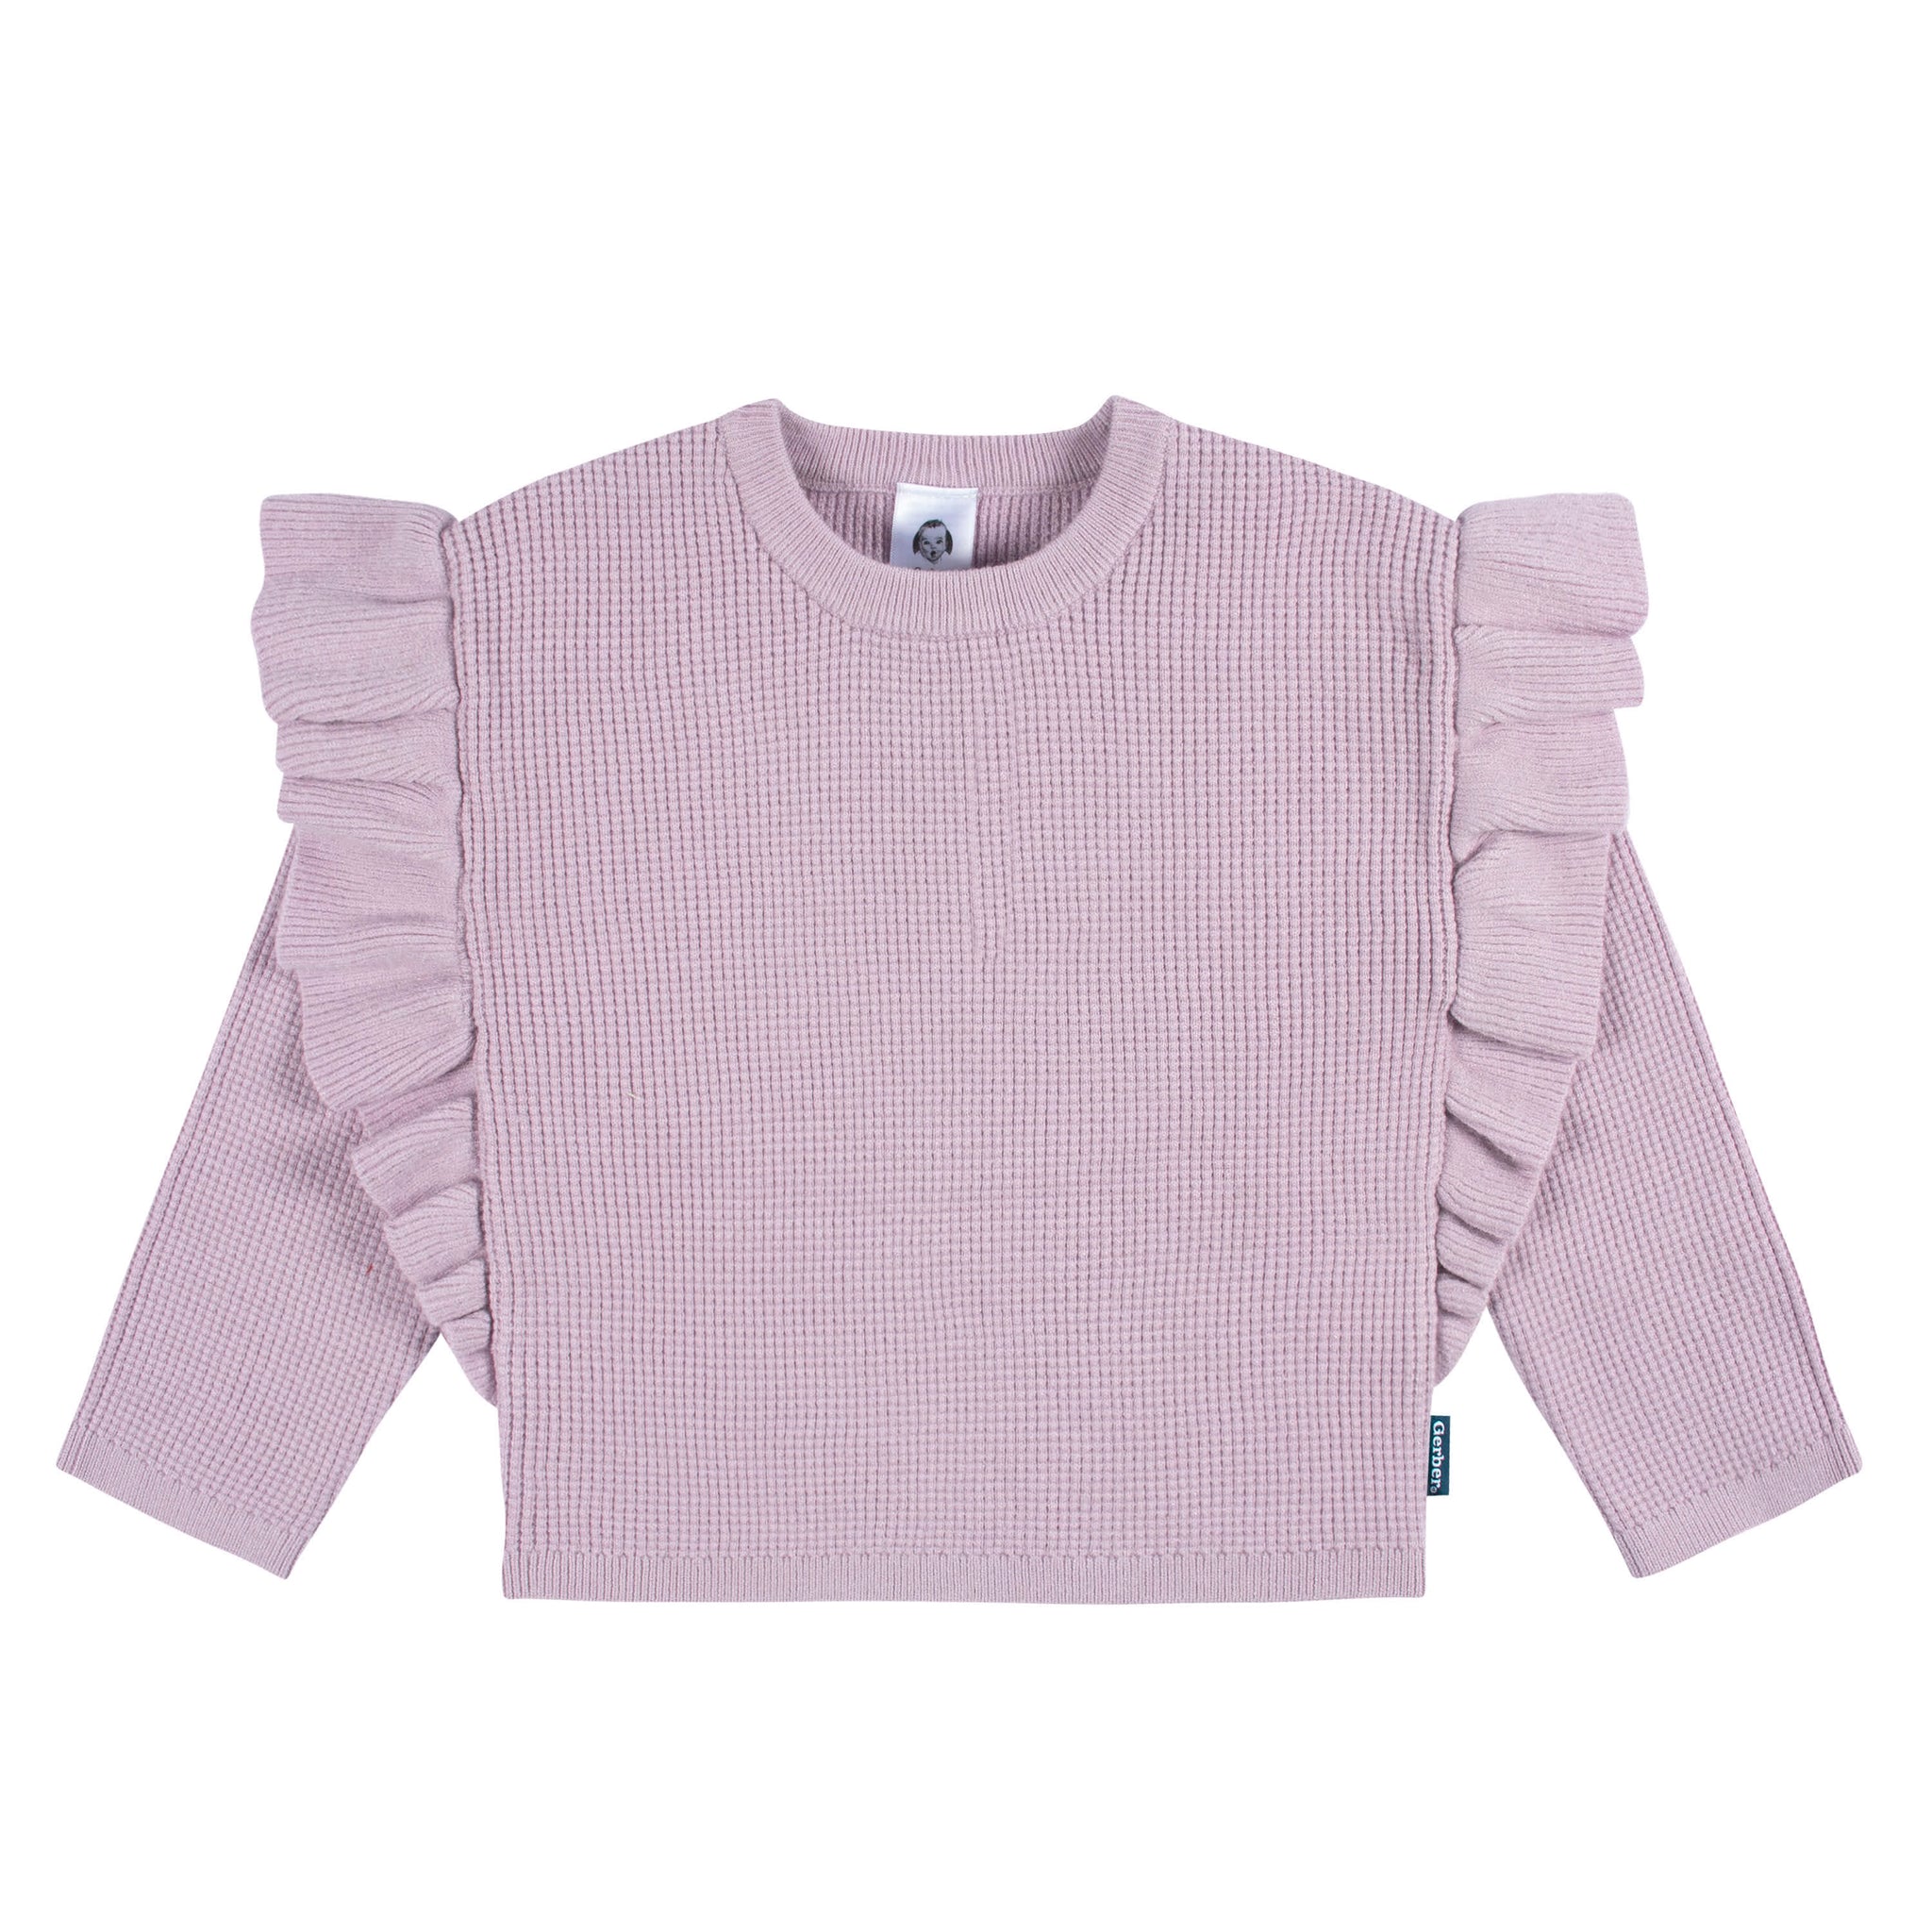 2-Piece Infant and Toddler Girls Lavender Sweater Knit Set-Gerber Childrenswear Wholesale